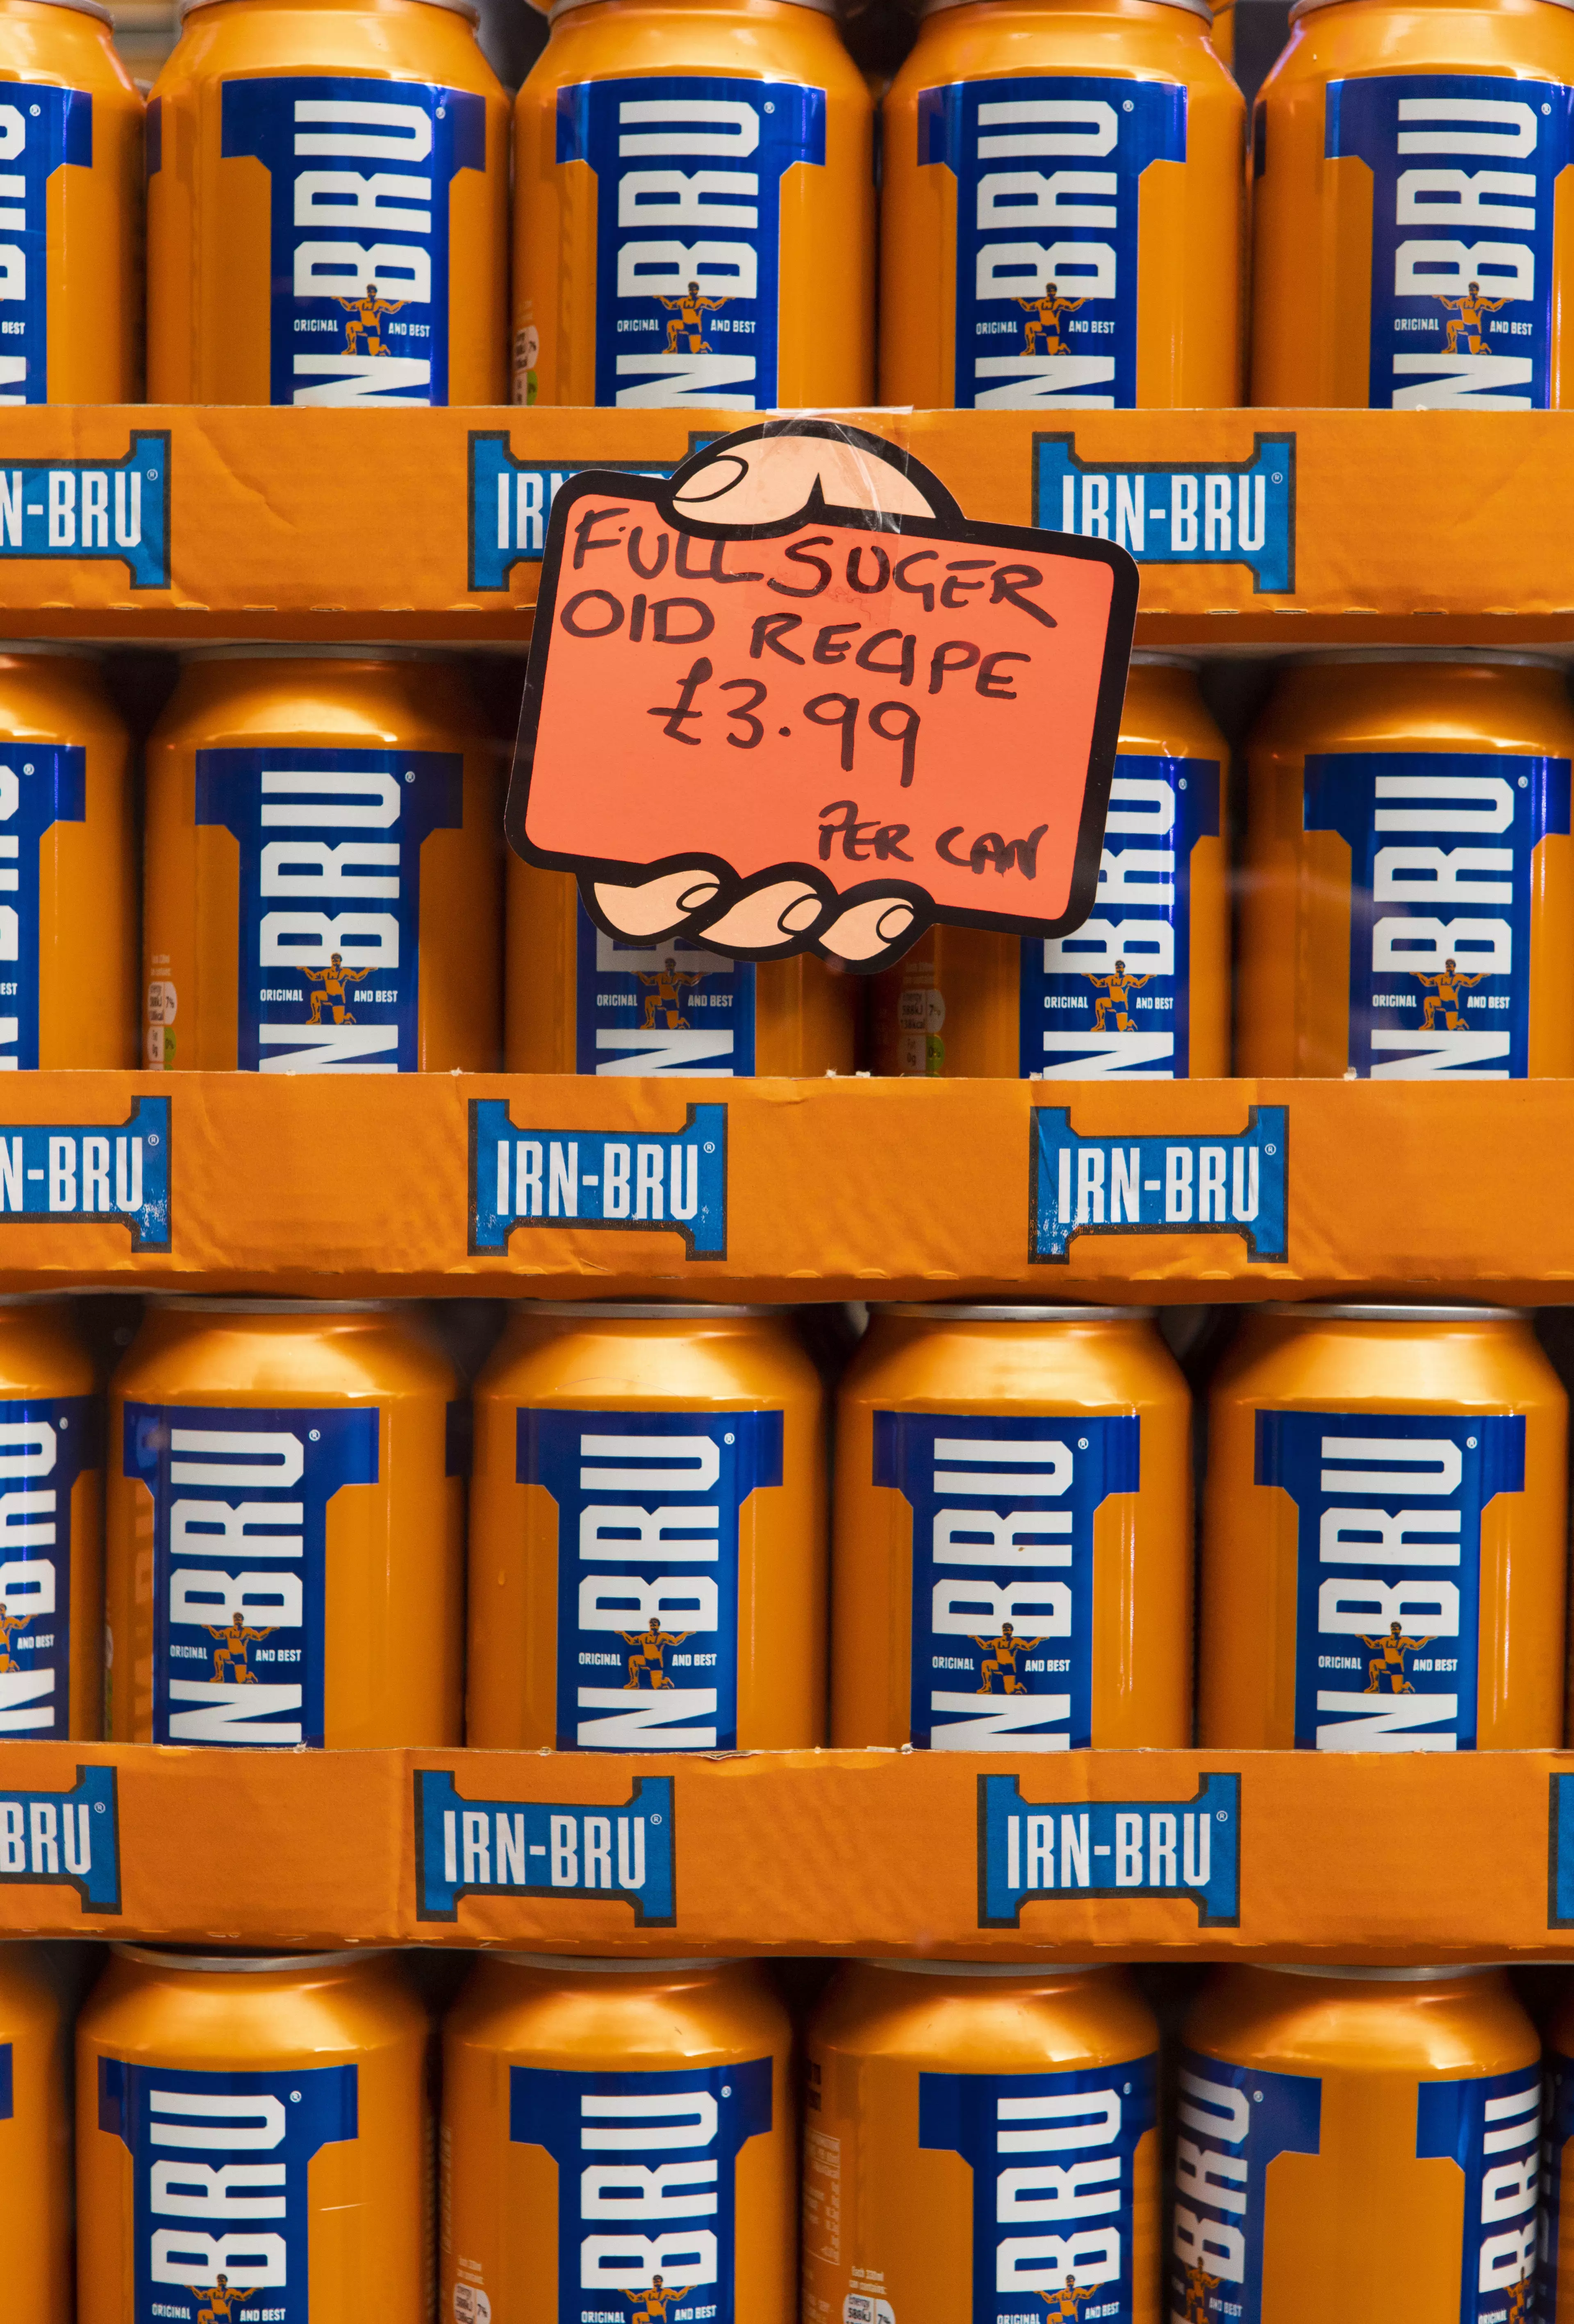 The people of Glasgow seem happy to pay £3.99 for a can of original recipe Irn-Bru.